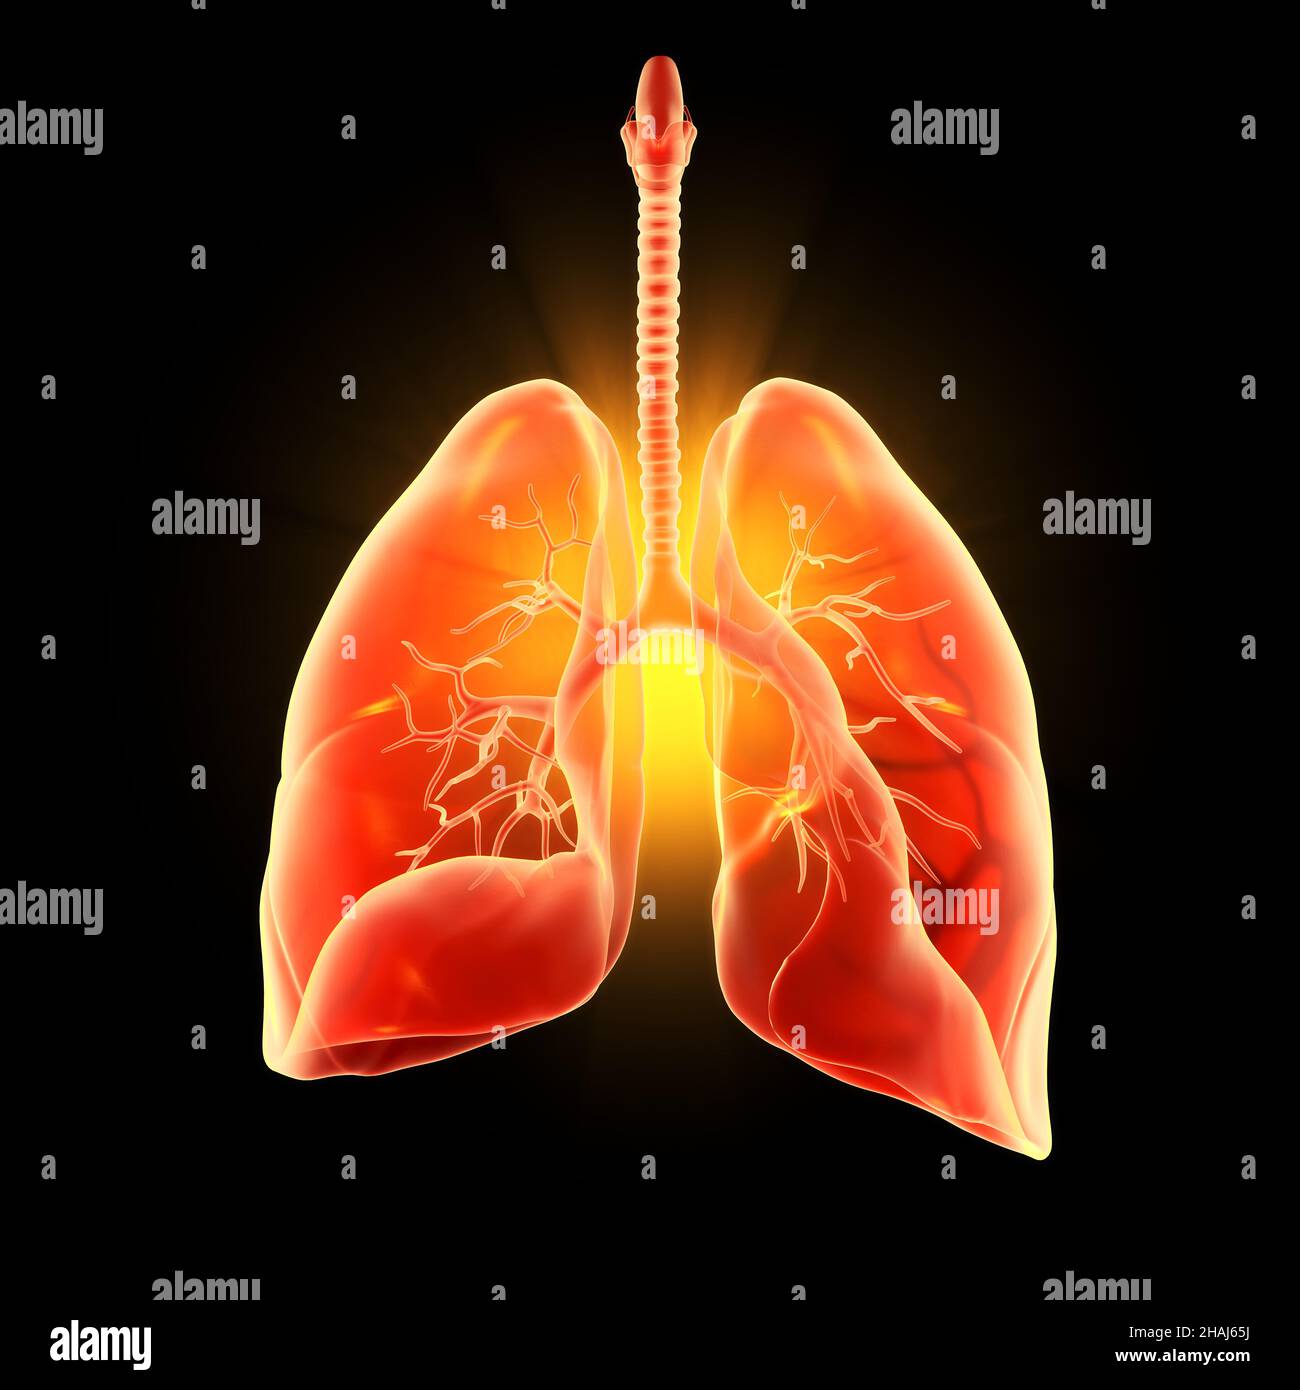 Illustration showing highlighted human lungs, pneumonia, 3D illustration Stock Photo